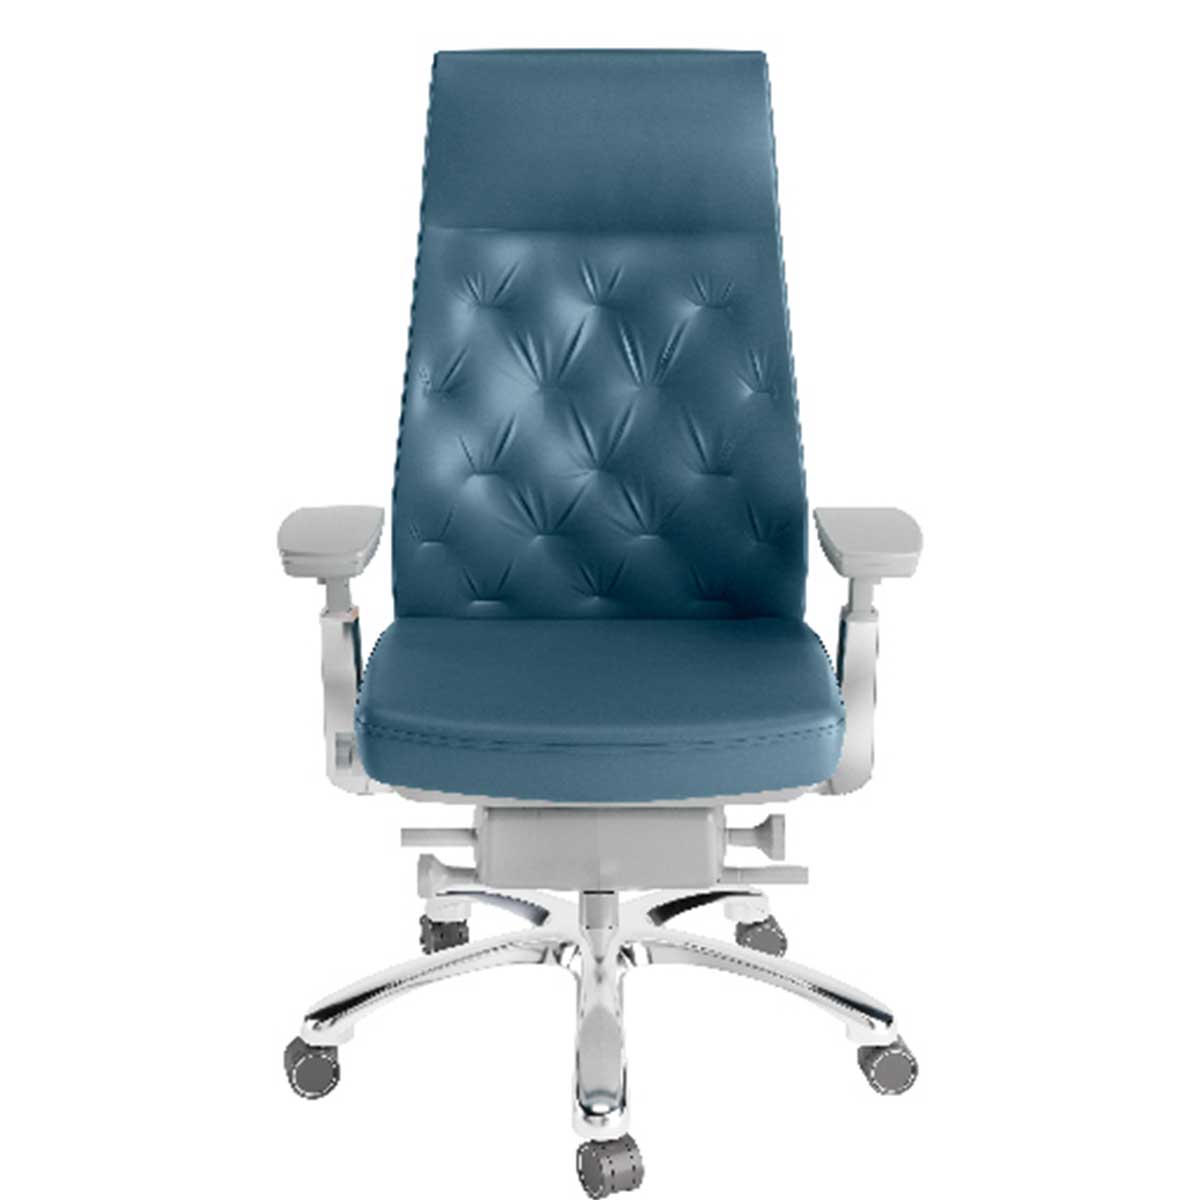 Boss Chair Manufacturers, Suppliers in Lawrence Road